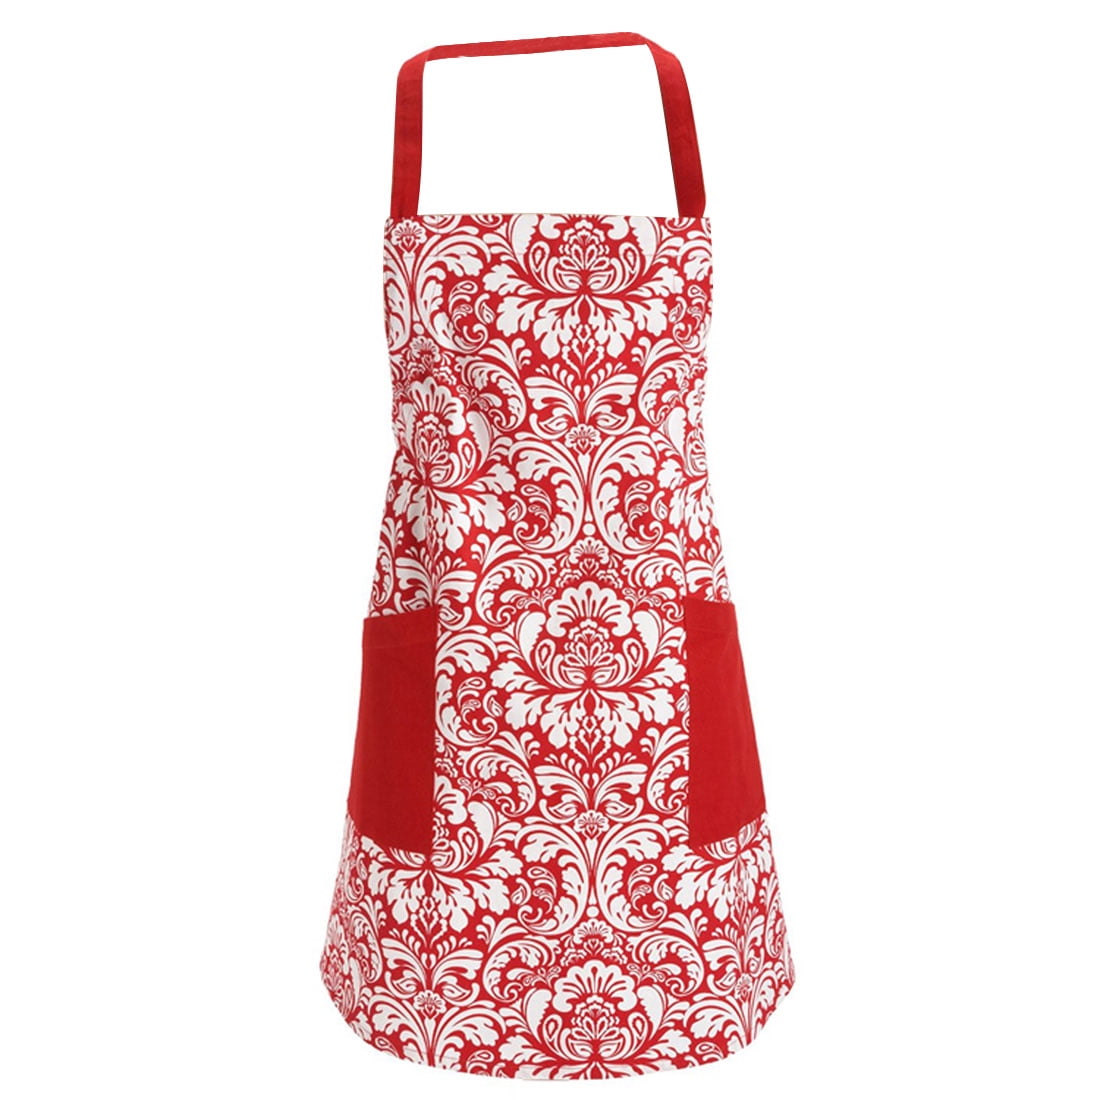 Kitchen Apron Cooking Apron Baking Apron With 2 Pockets Red Walmart 